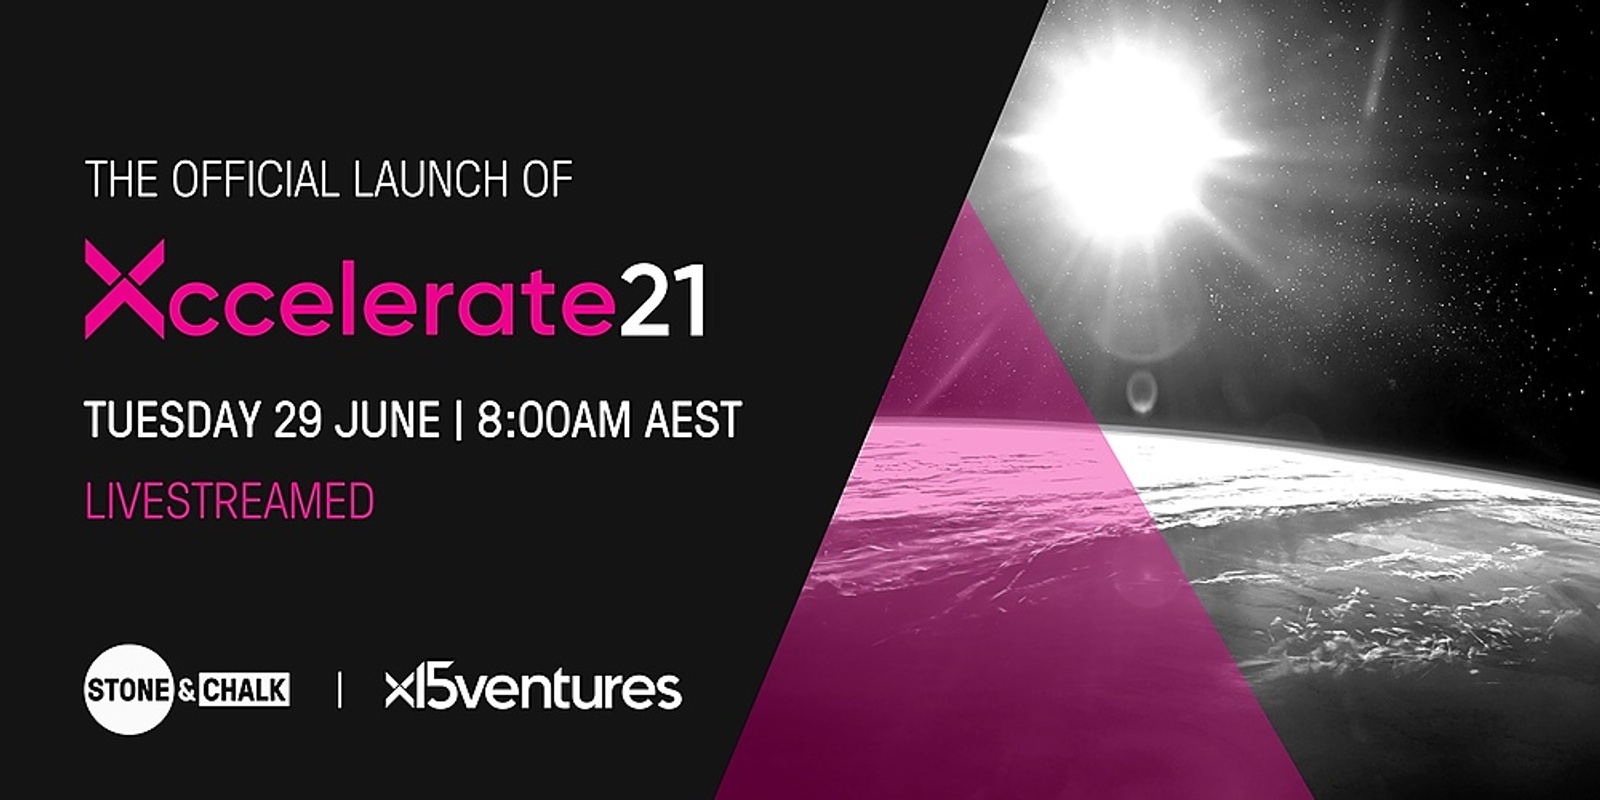 Banner image for The Official Launch of Xccelerate21